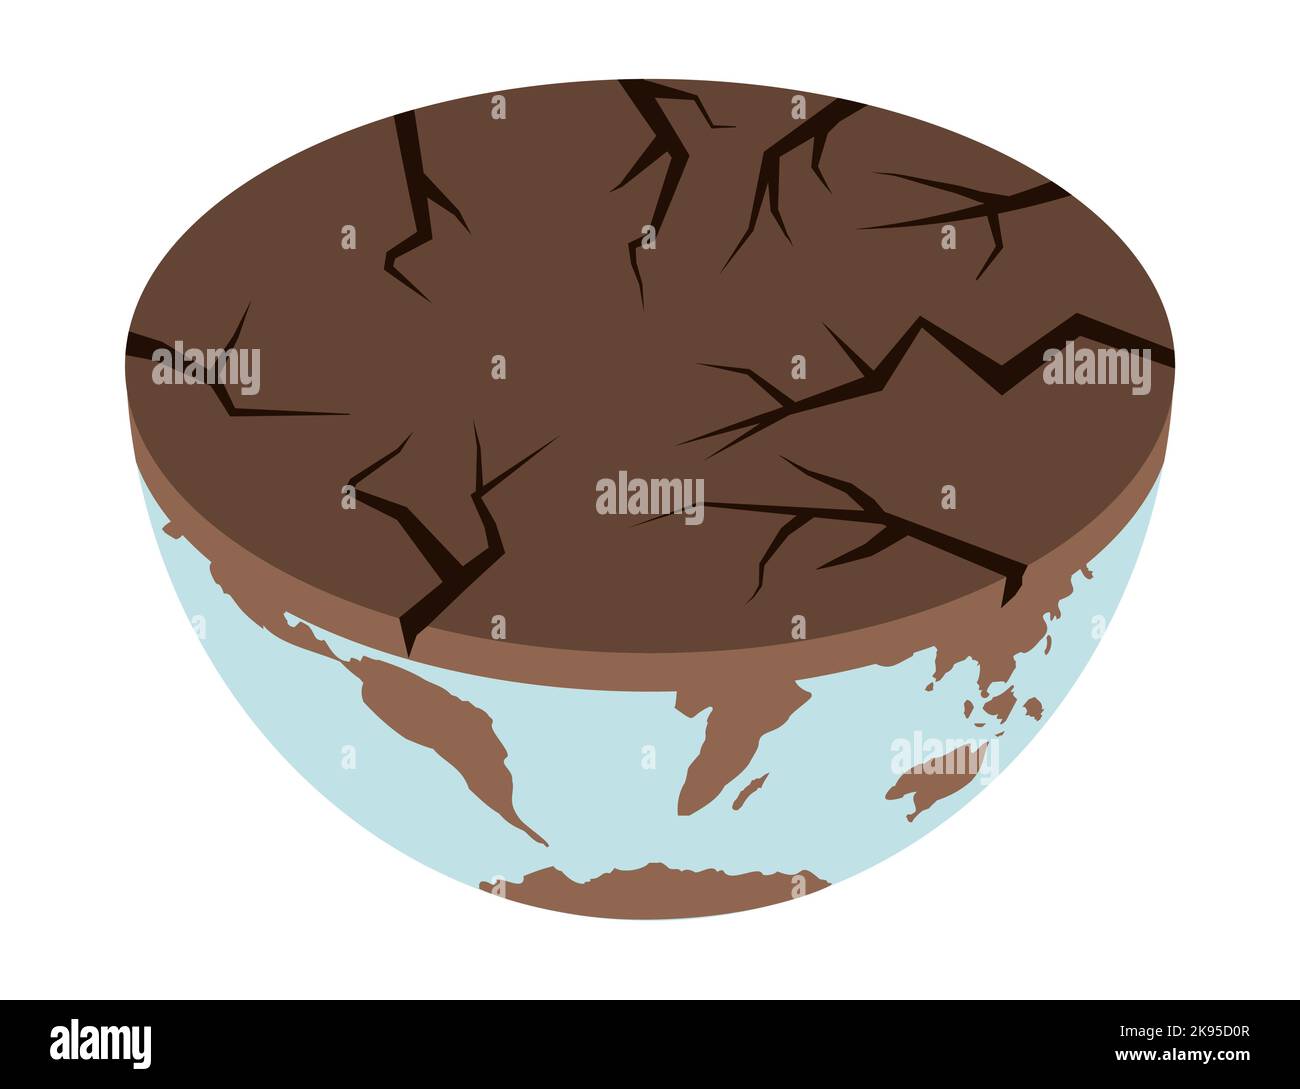 Earth climate change icon - vector isometric ecology illustration of an environmental concept to save the planet Earth. Concept vision on the theme of Stock Vector